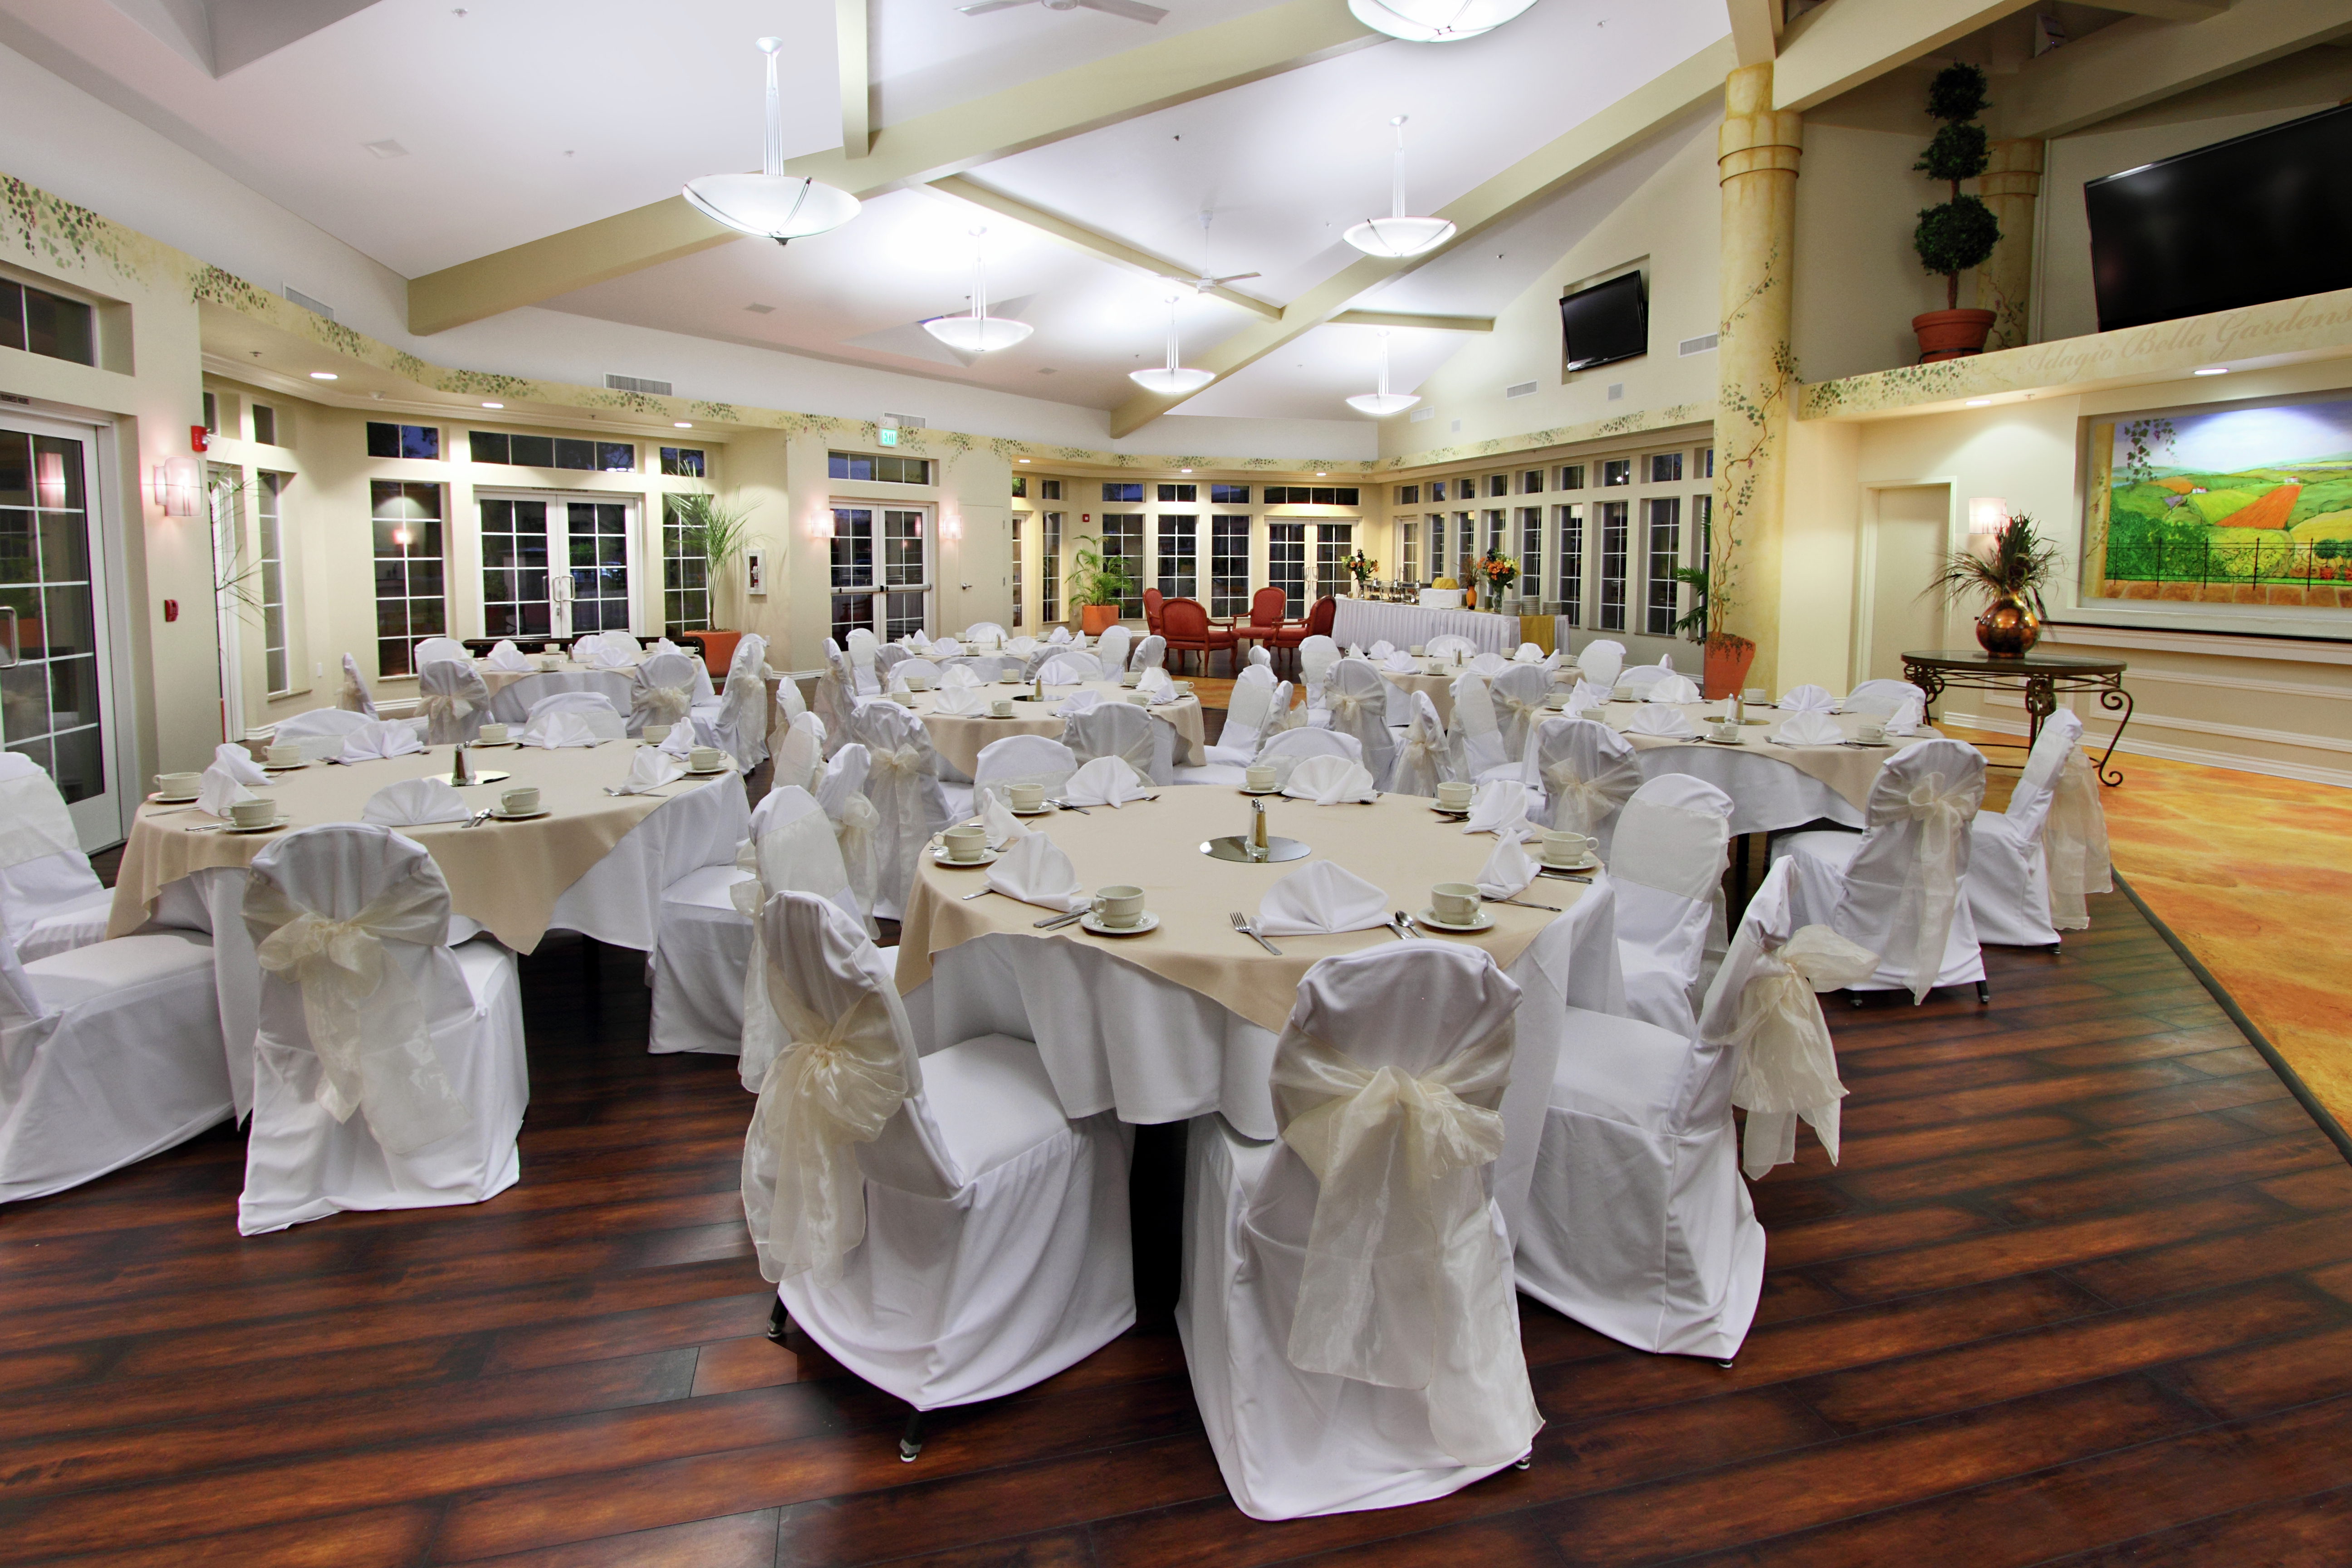 Place Settings and White Linens on Round Tables, White Chairs, TVs, and Large Windows in Meeting Space Set up for Wedding